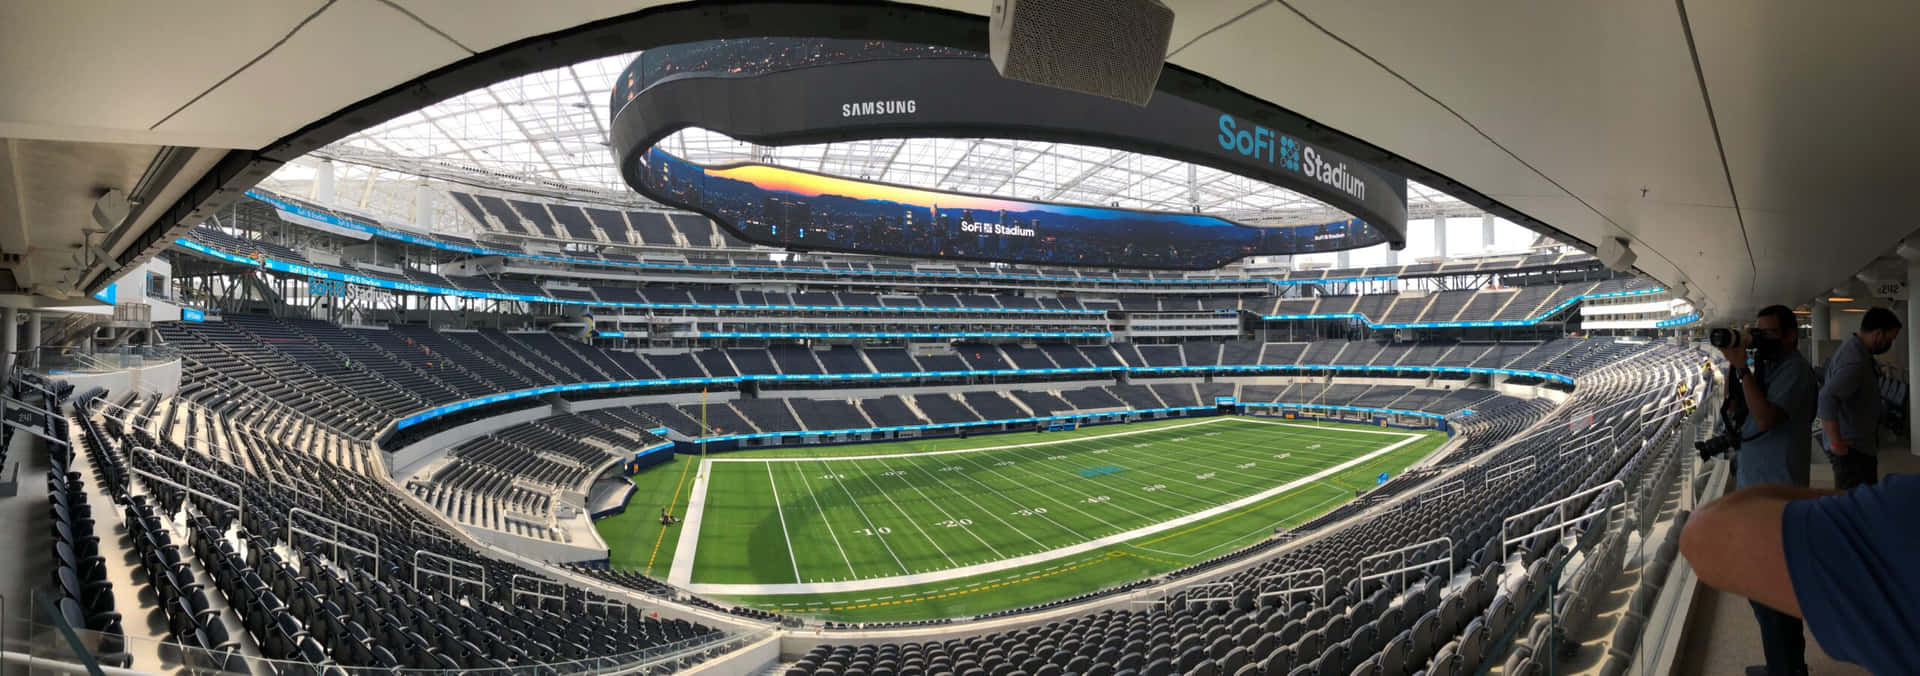 "Welcome to Sofi Stadium, Home of the Los Angeles Rams and Los Angeles Chargers"